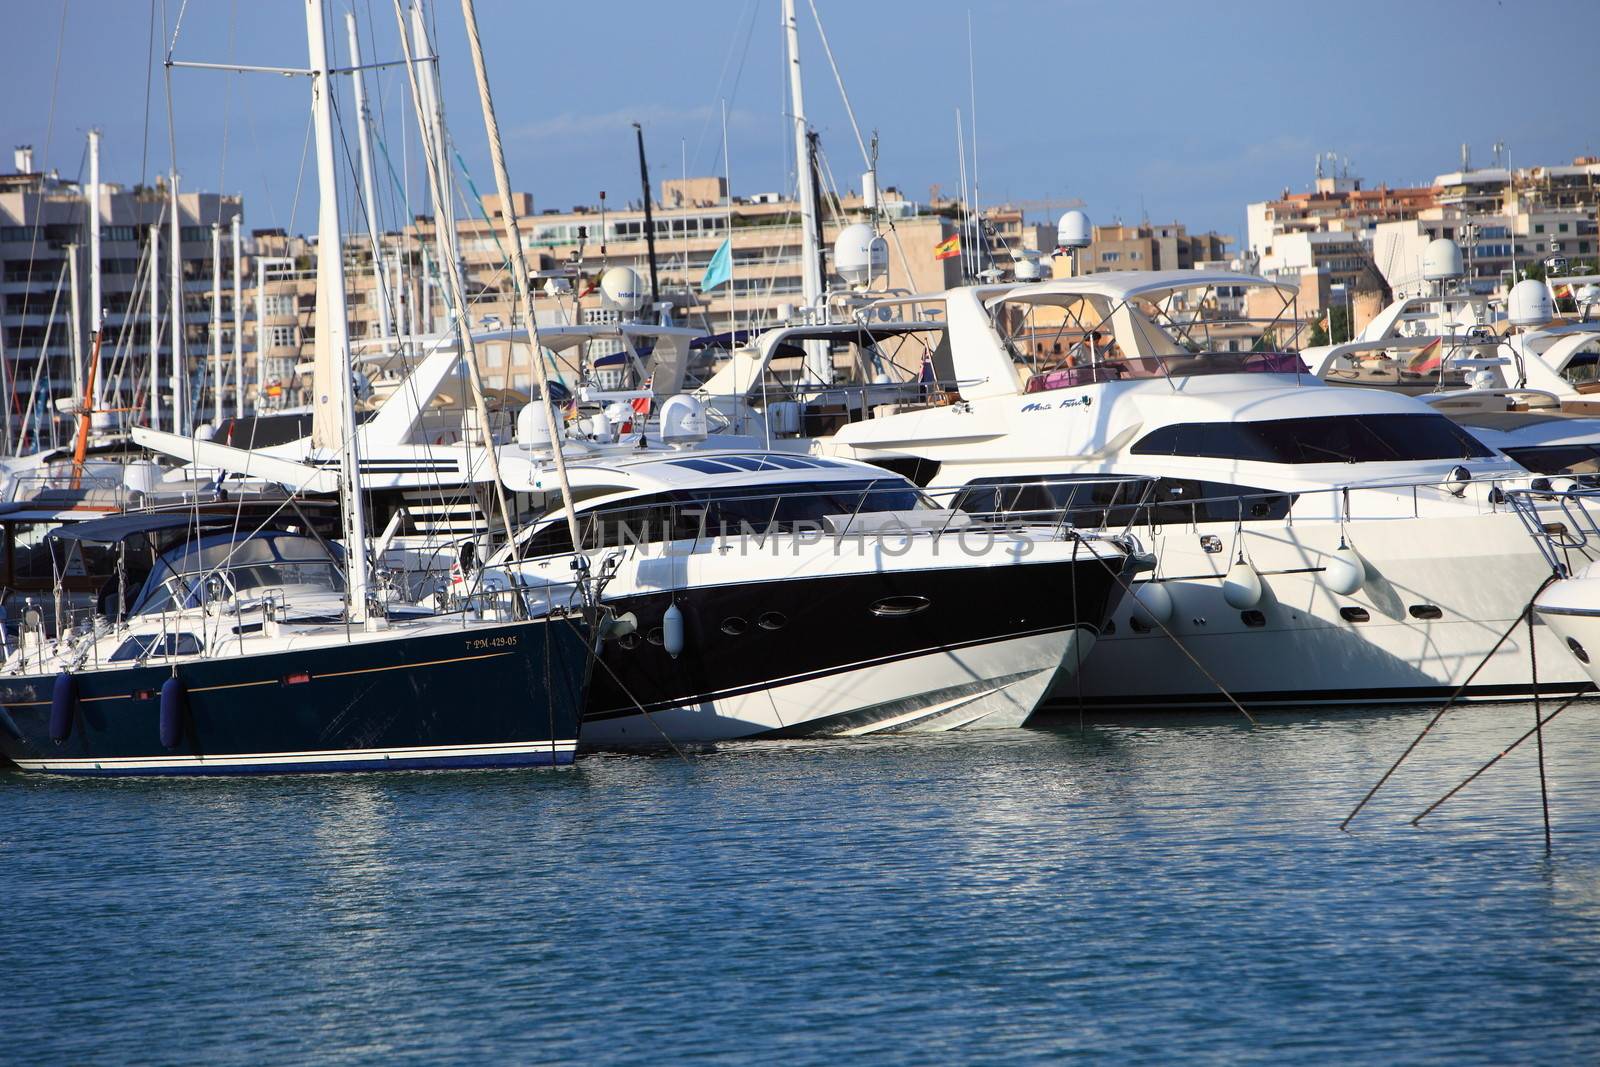 Luxury yachts in harbour by Farina6000